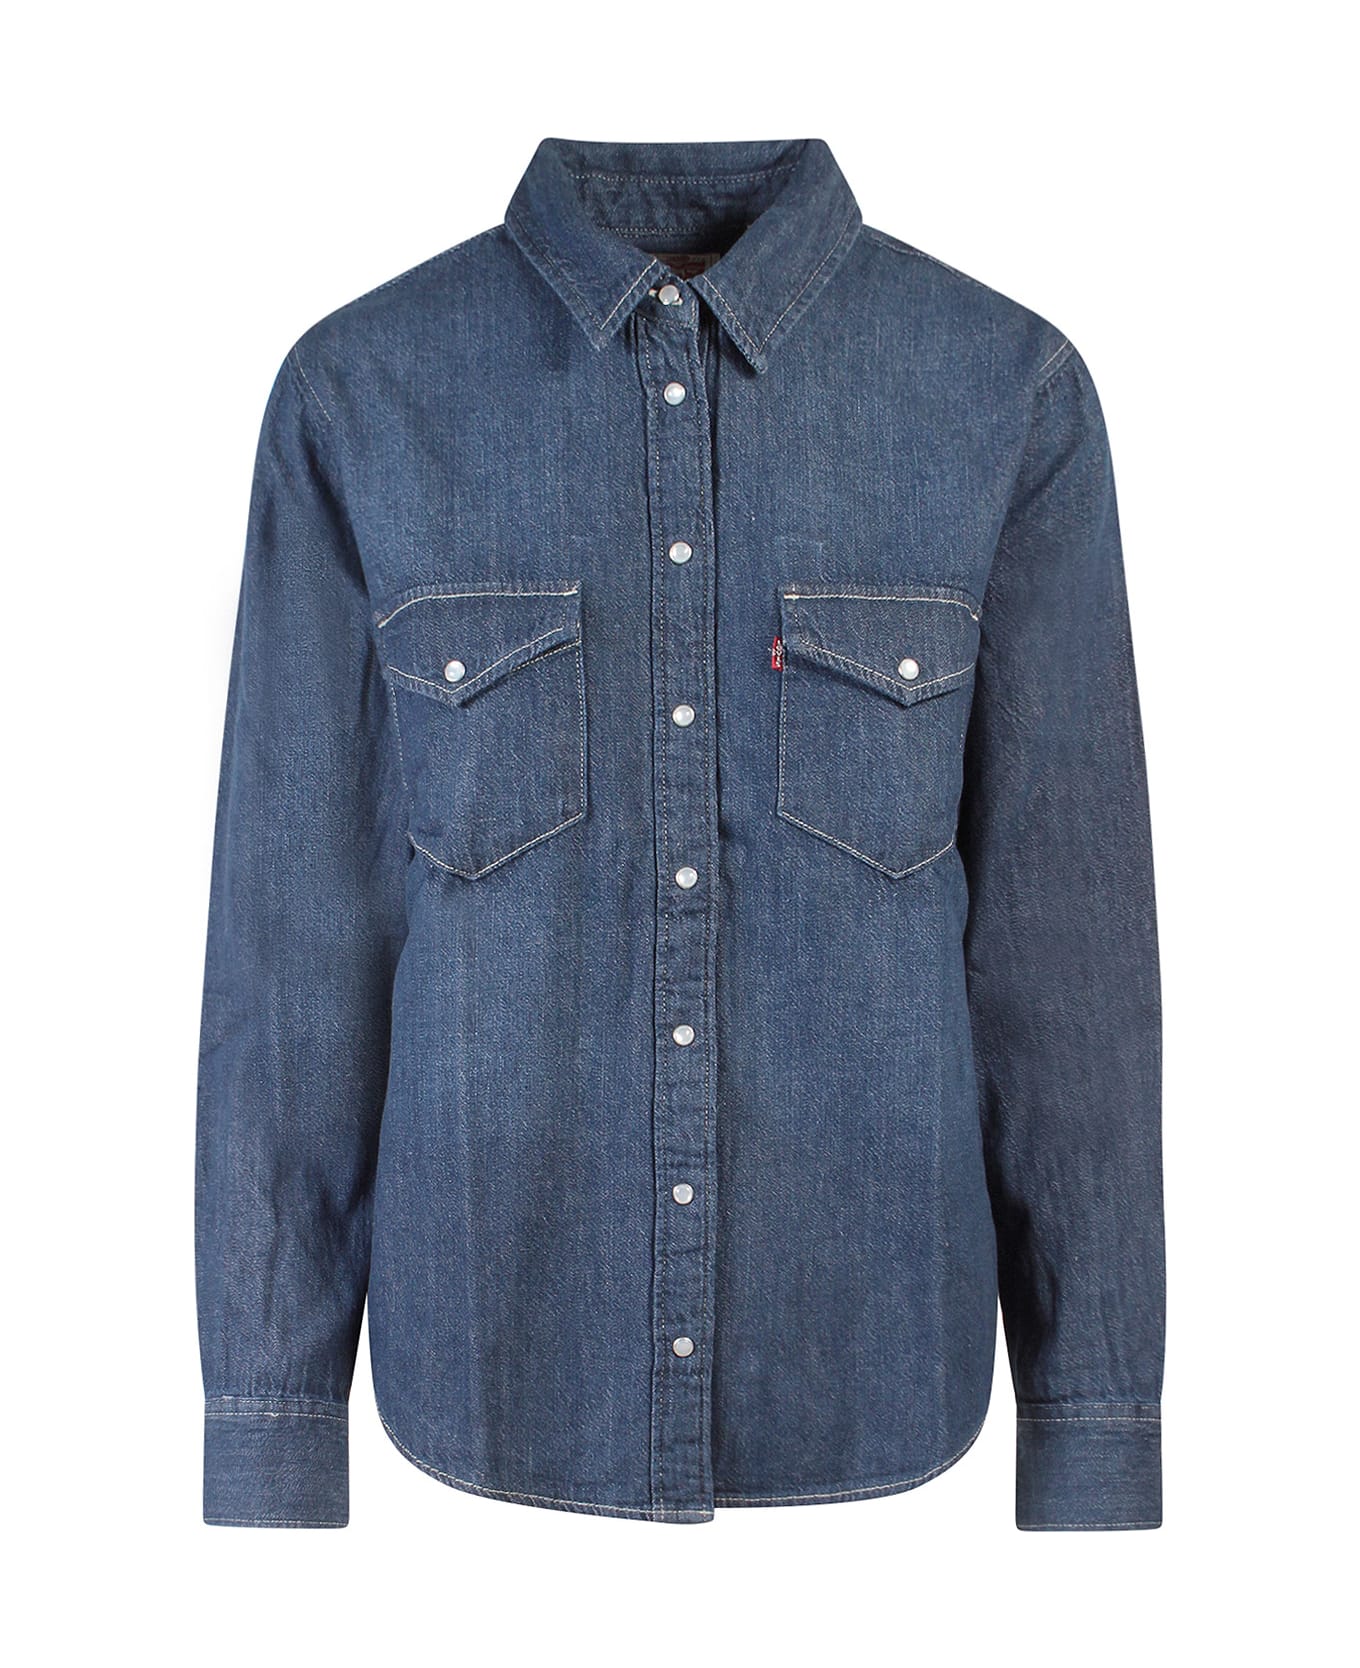 Levi's The Western Shirt - Blue シャツ